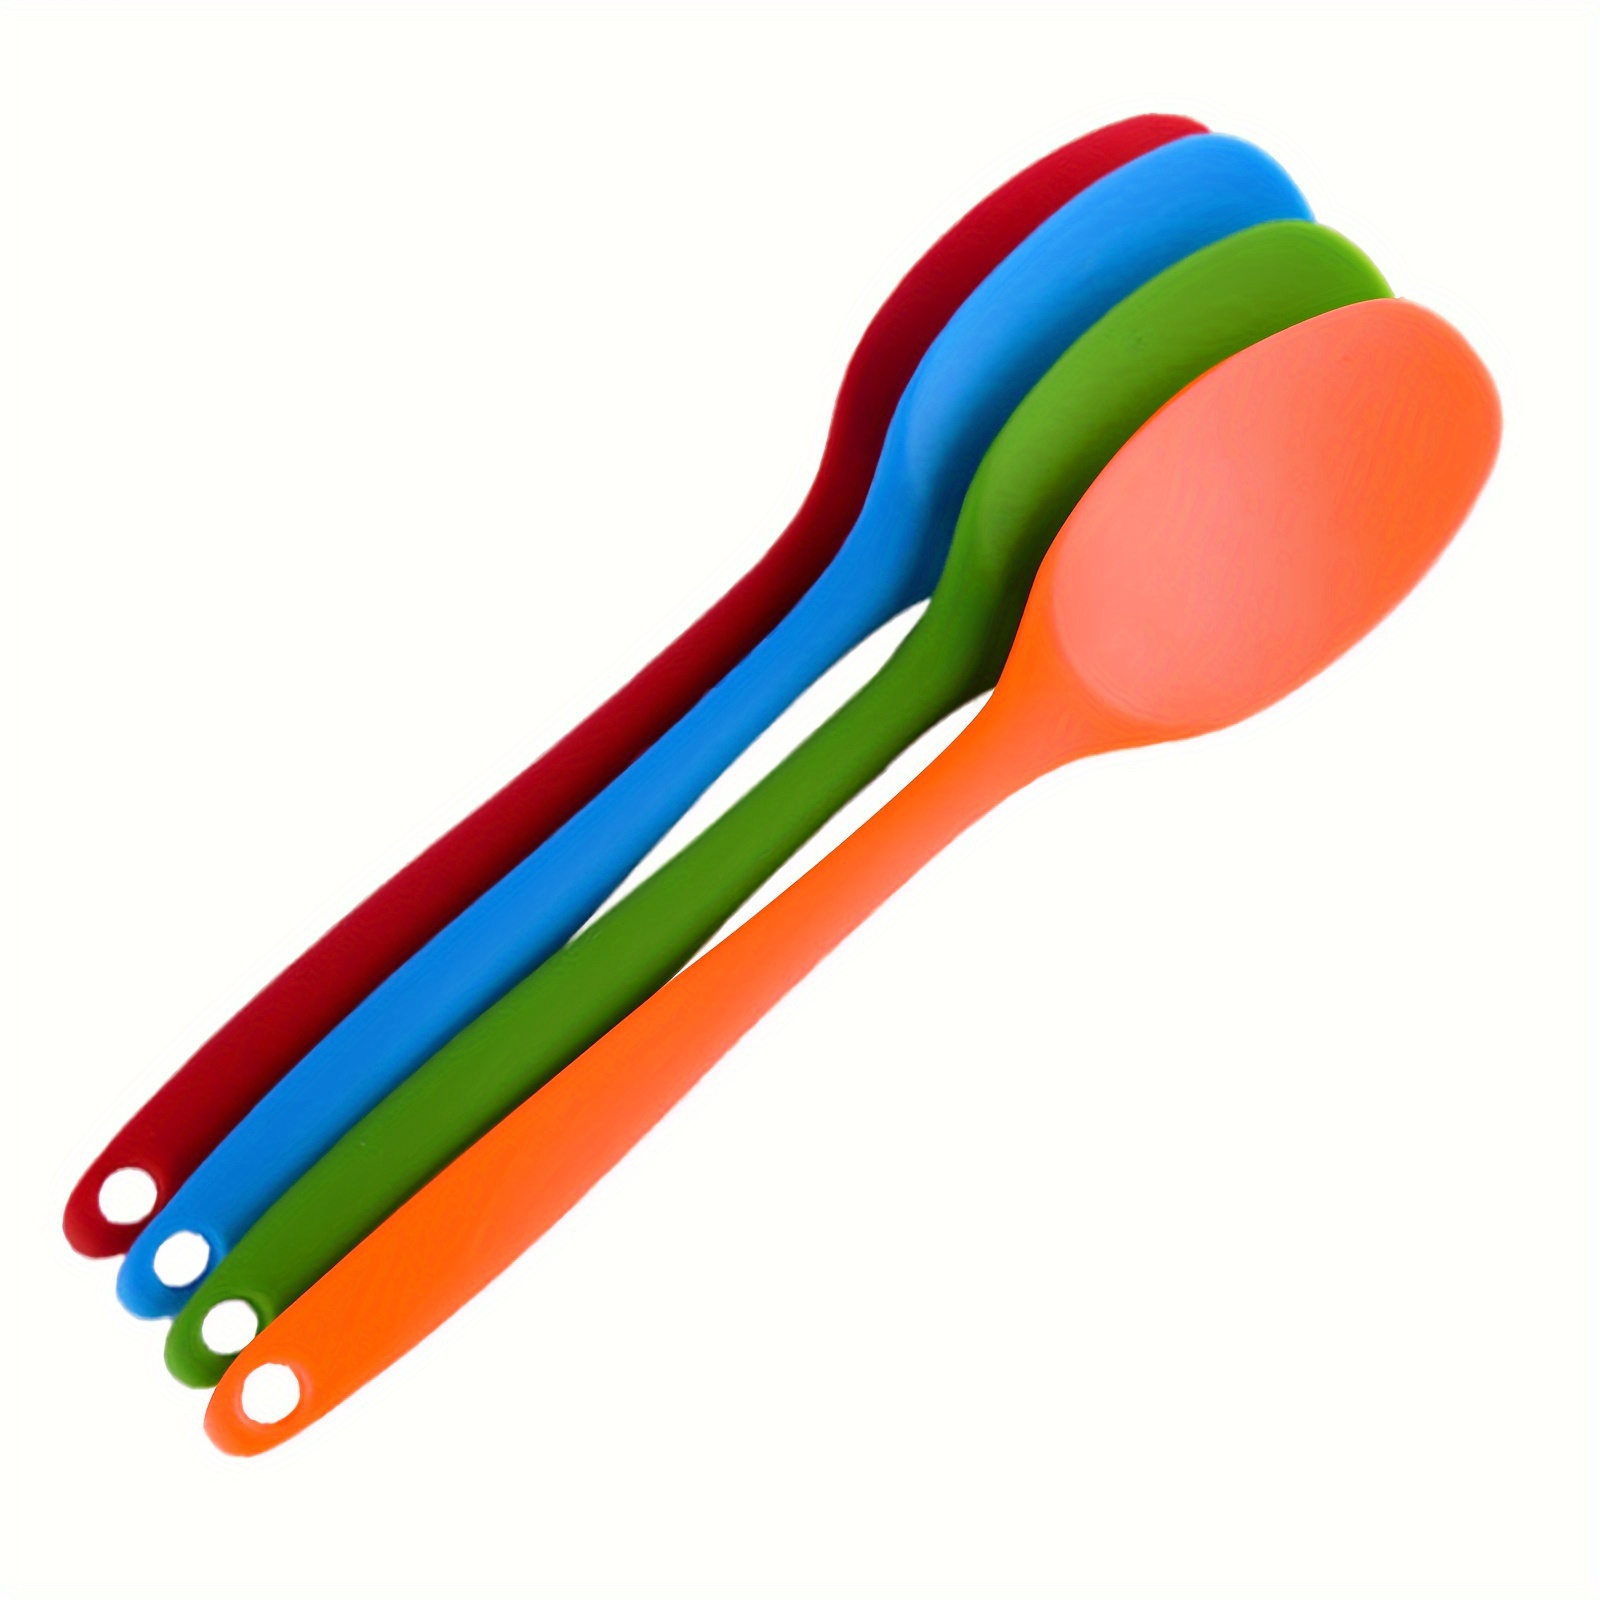 8 Colors Silicone Spoon Heat Resistant Easy To Clean Non-stick Rice Spoons  High Temperature Spoon Tableware Utensil Kitchen Tool